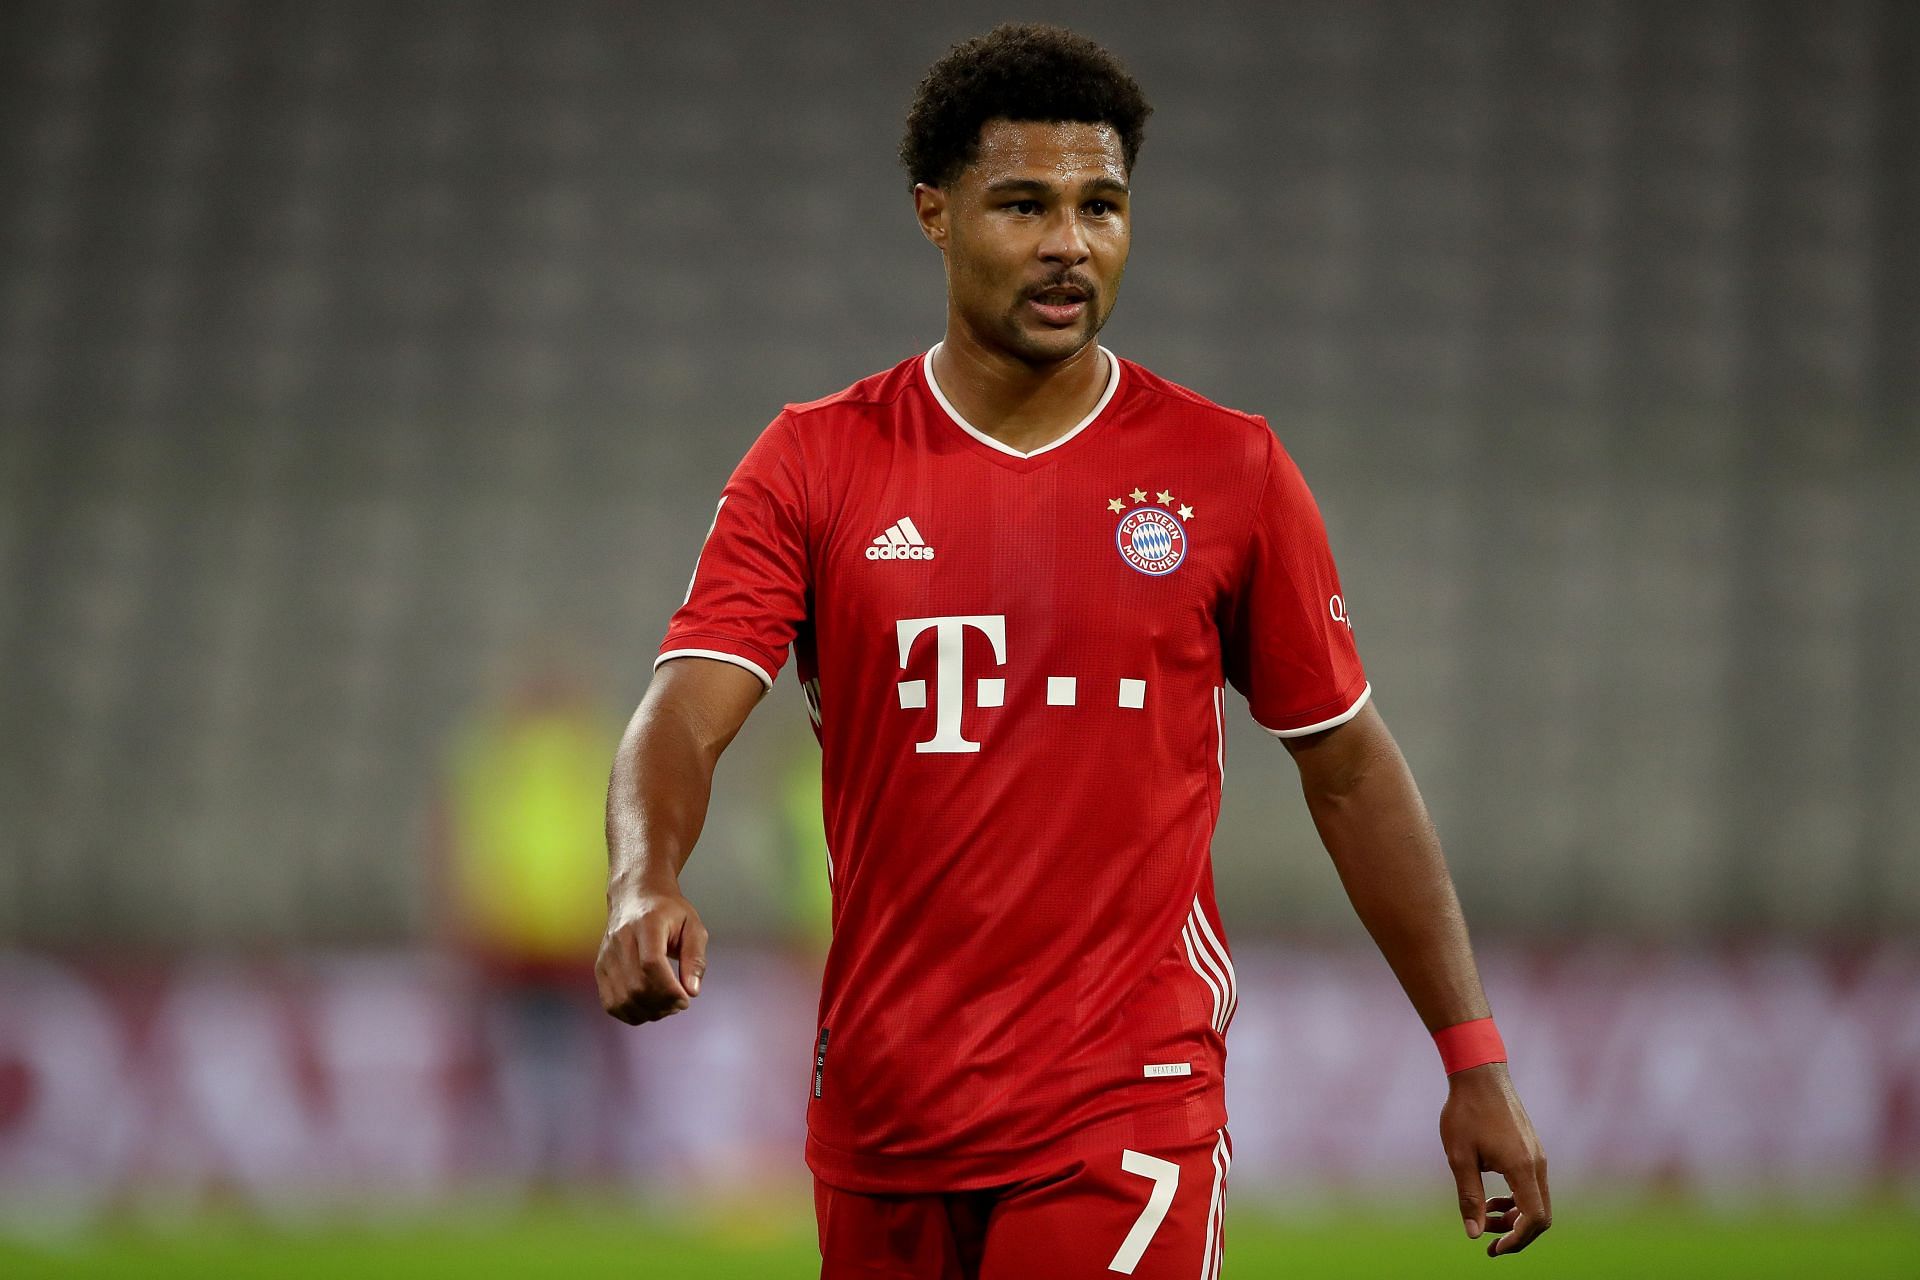 Serge Gnabry has slowly become undroppable for both Bayern and Germany